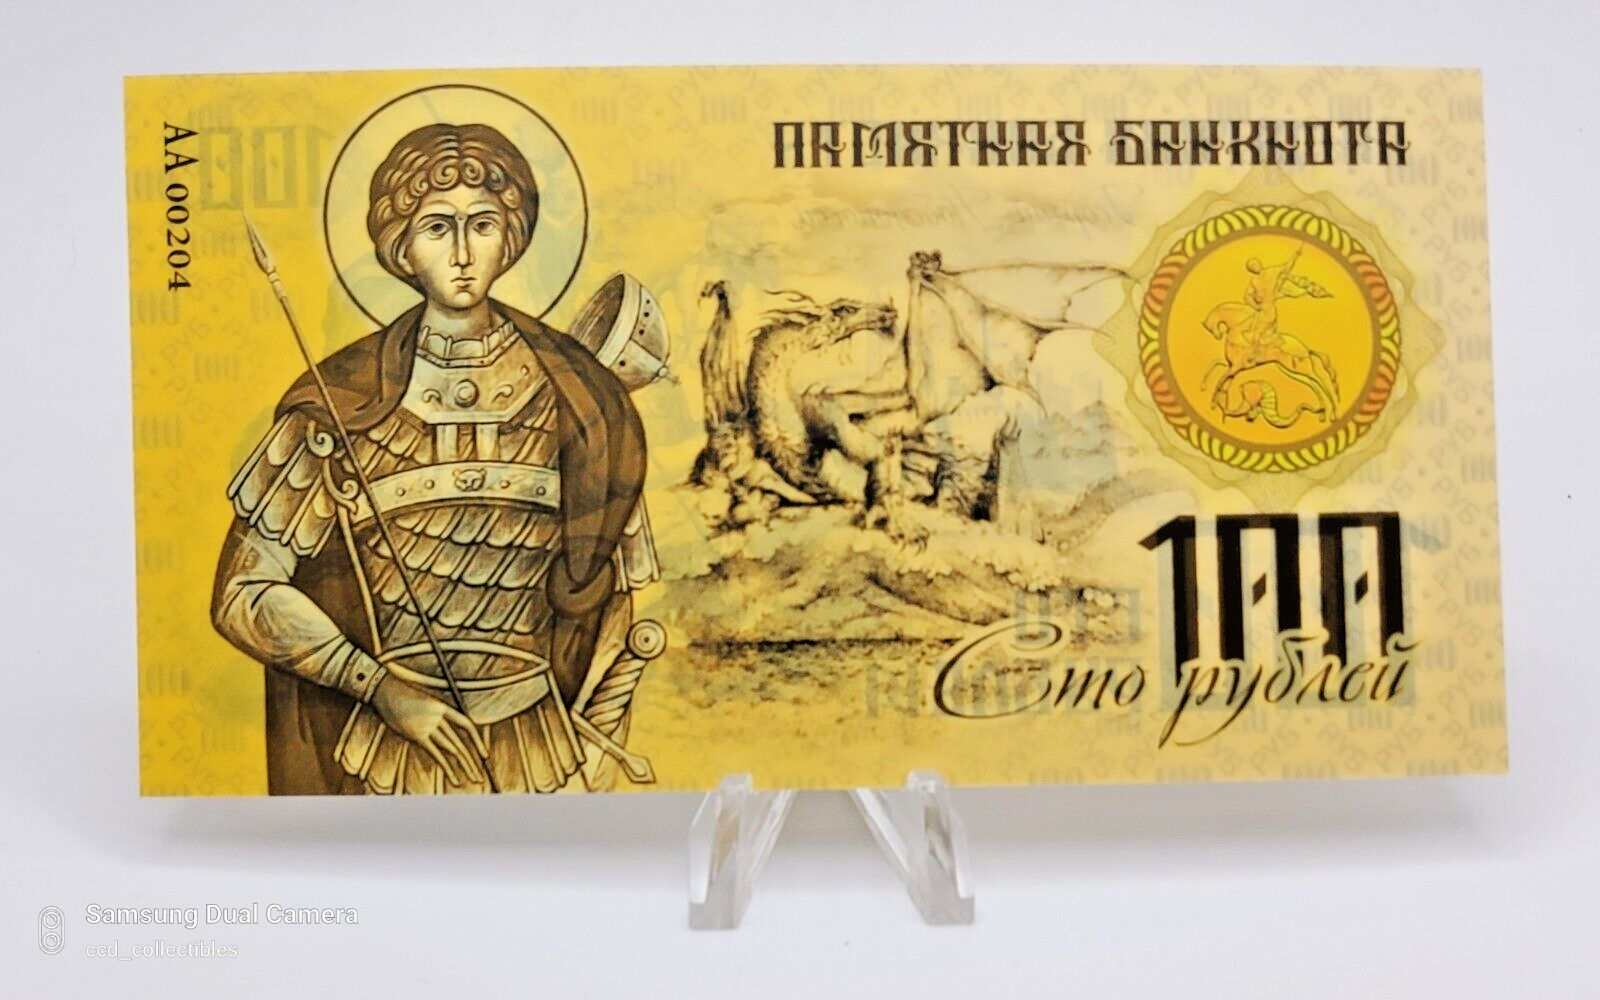 Primary image for Polymer Banknote: Saint George fighting against Dragon ~ Fantasy Catholic note